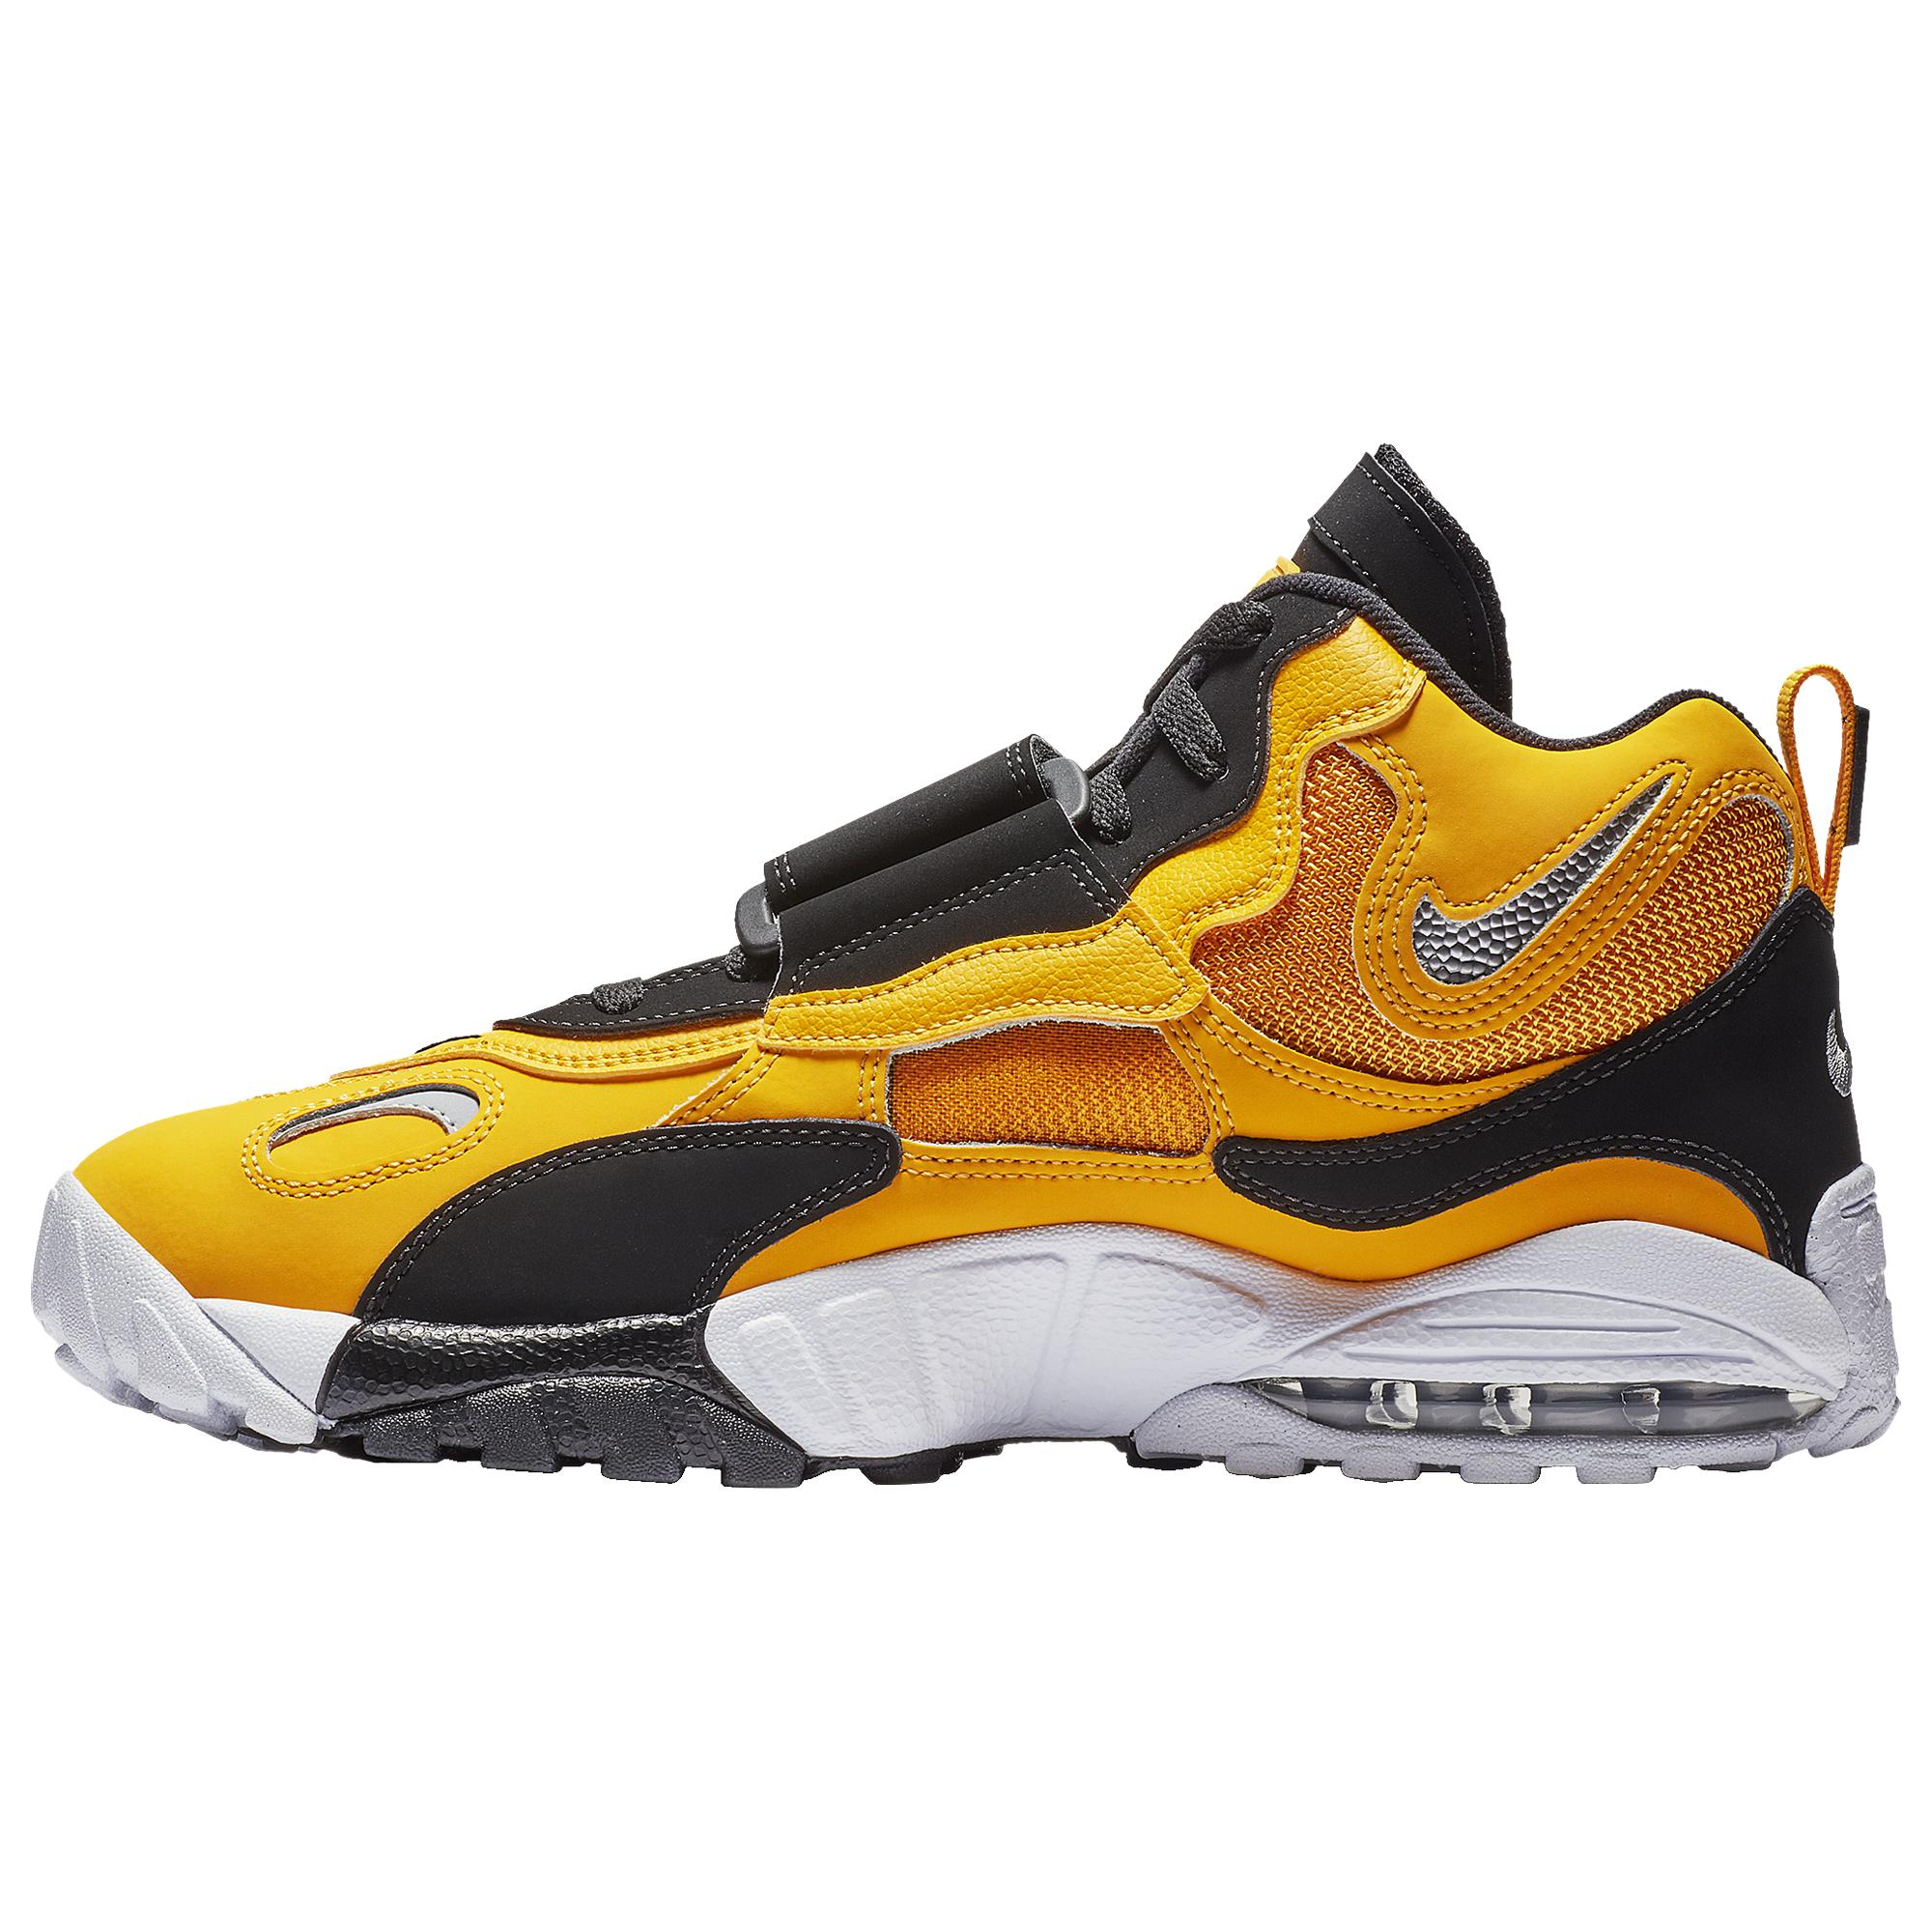  Nike  Leather Air Max Speed Turf  Training Shoes  in 